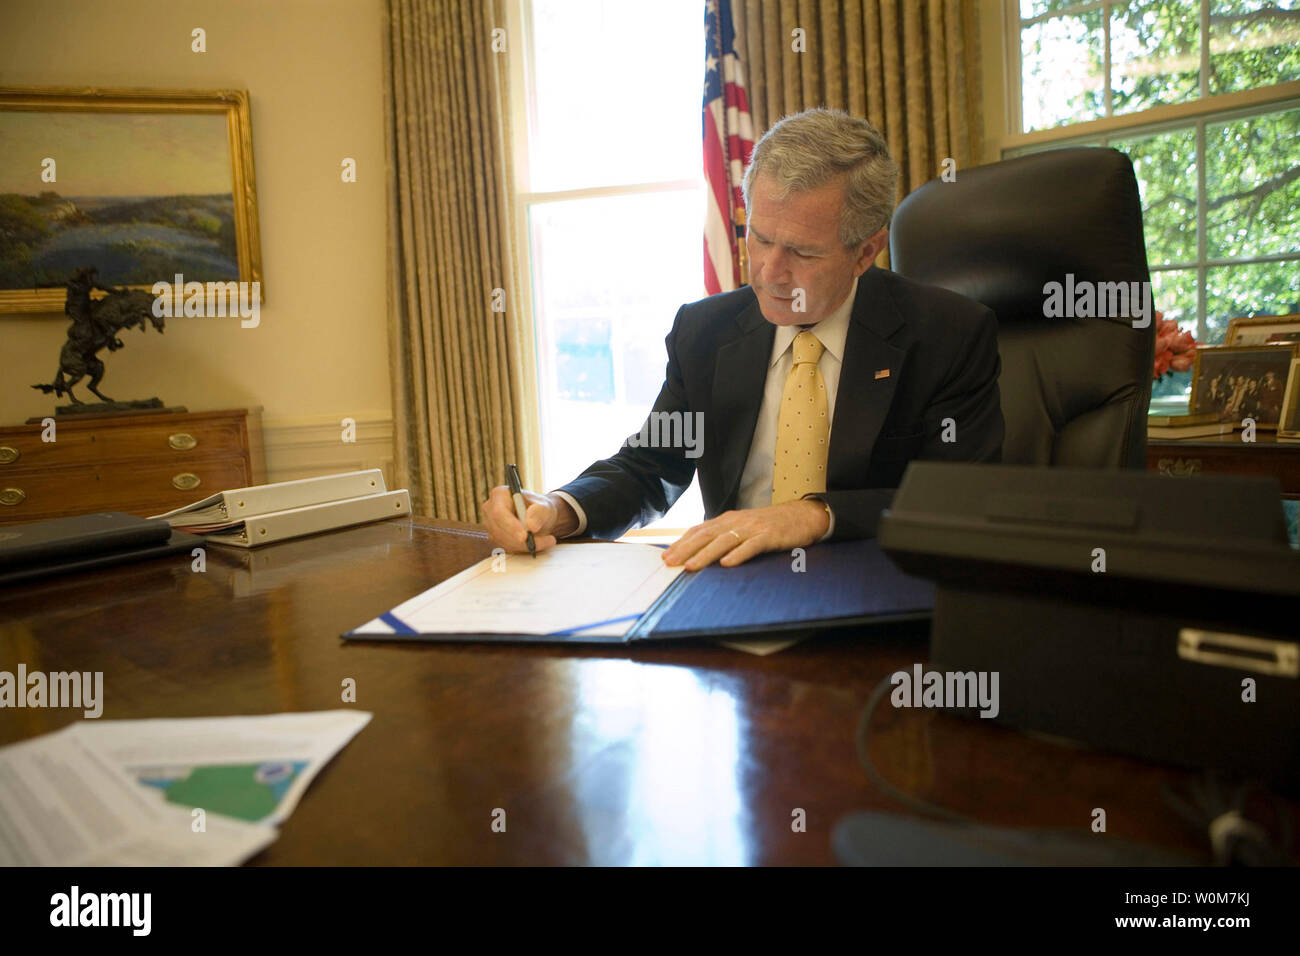 President George W. Bush signs into law H.R. 3169, the 'Pell Grant Hurricane and Disaster Relief Act,' which authorizes the Department of Education to waive requirements for Pell Grant repayments if student withdrawals from institutions of higher education are due to major disasters, on Sept. 21, 2005, in the Oval Office. The President also signed into law two other hurricane-related bills: H.R. 3668, the 'Student Grant Hurricane and Disaster Relief Act,' and H.R. 3672, the 'TANF Emergency Response and Recovery Act of 2005.'   (UPI Photo/Eric Draper/White House) Stock Photo